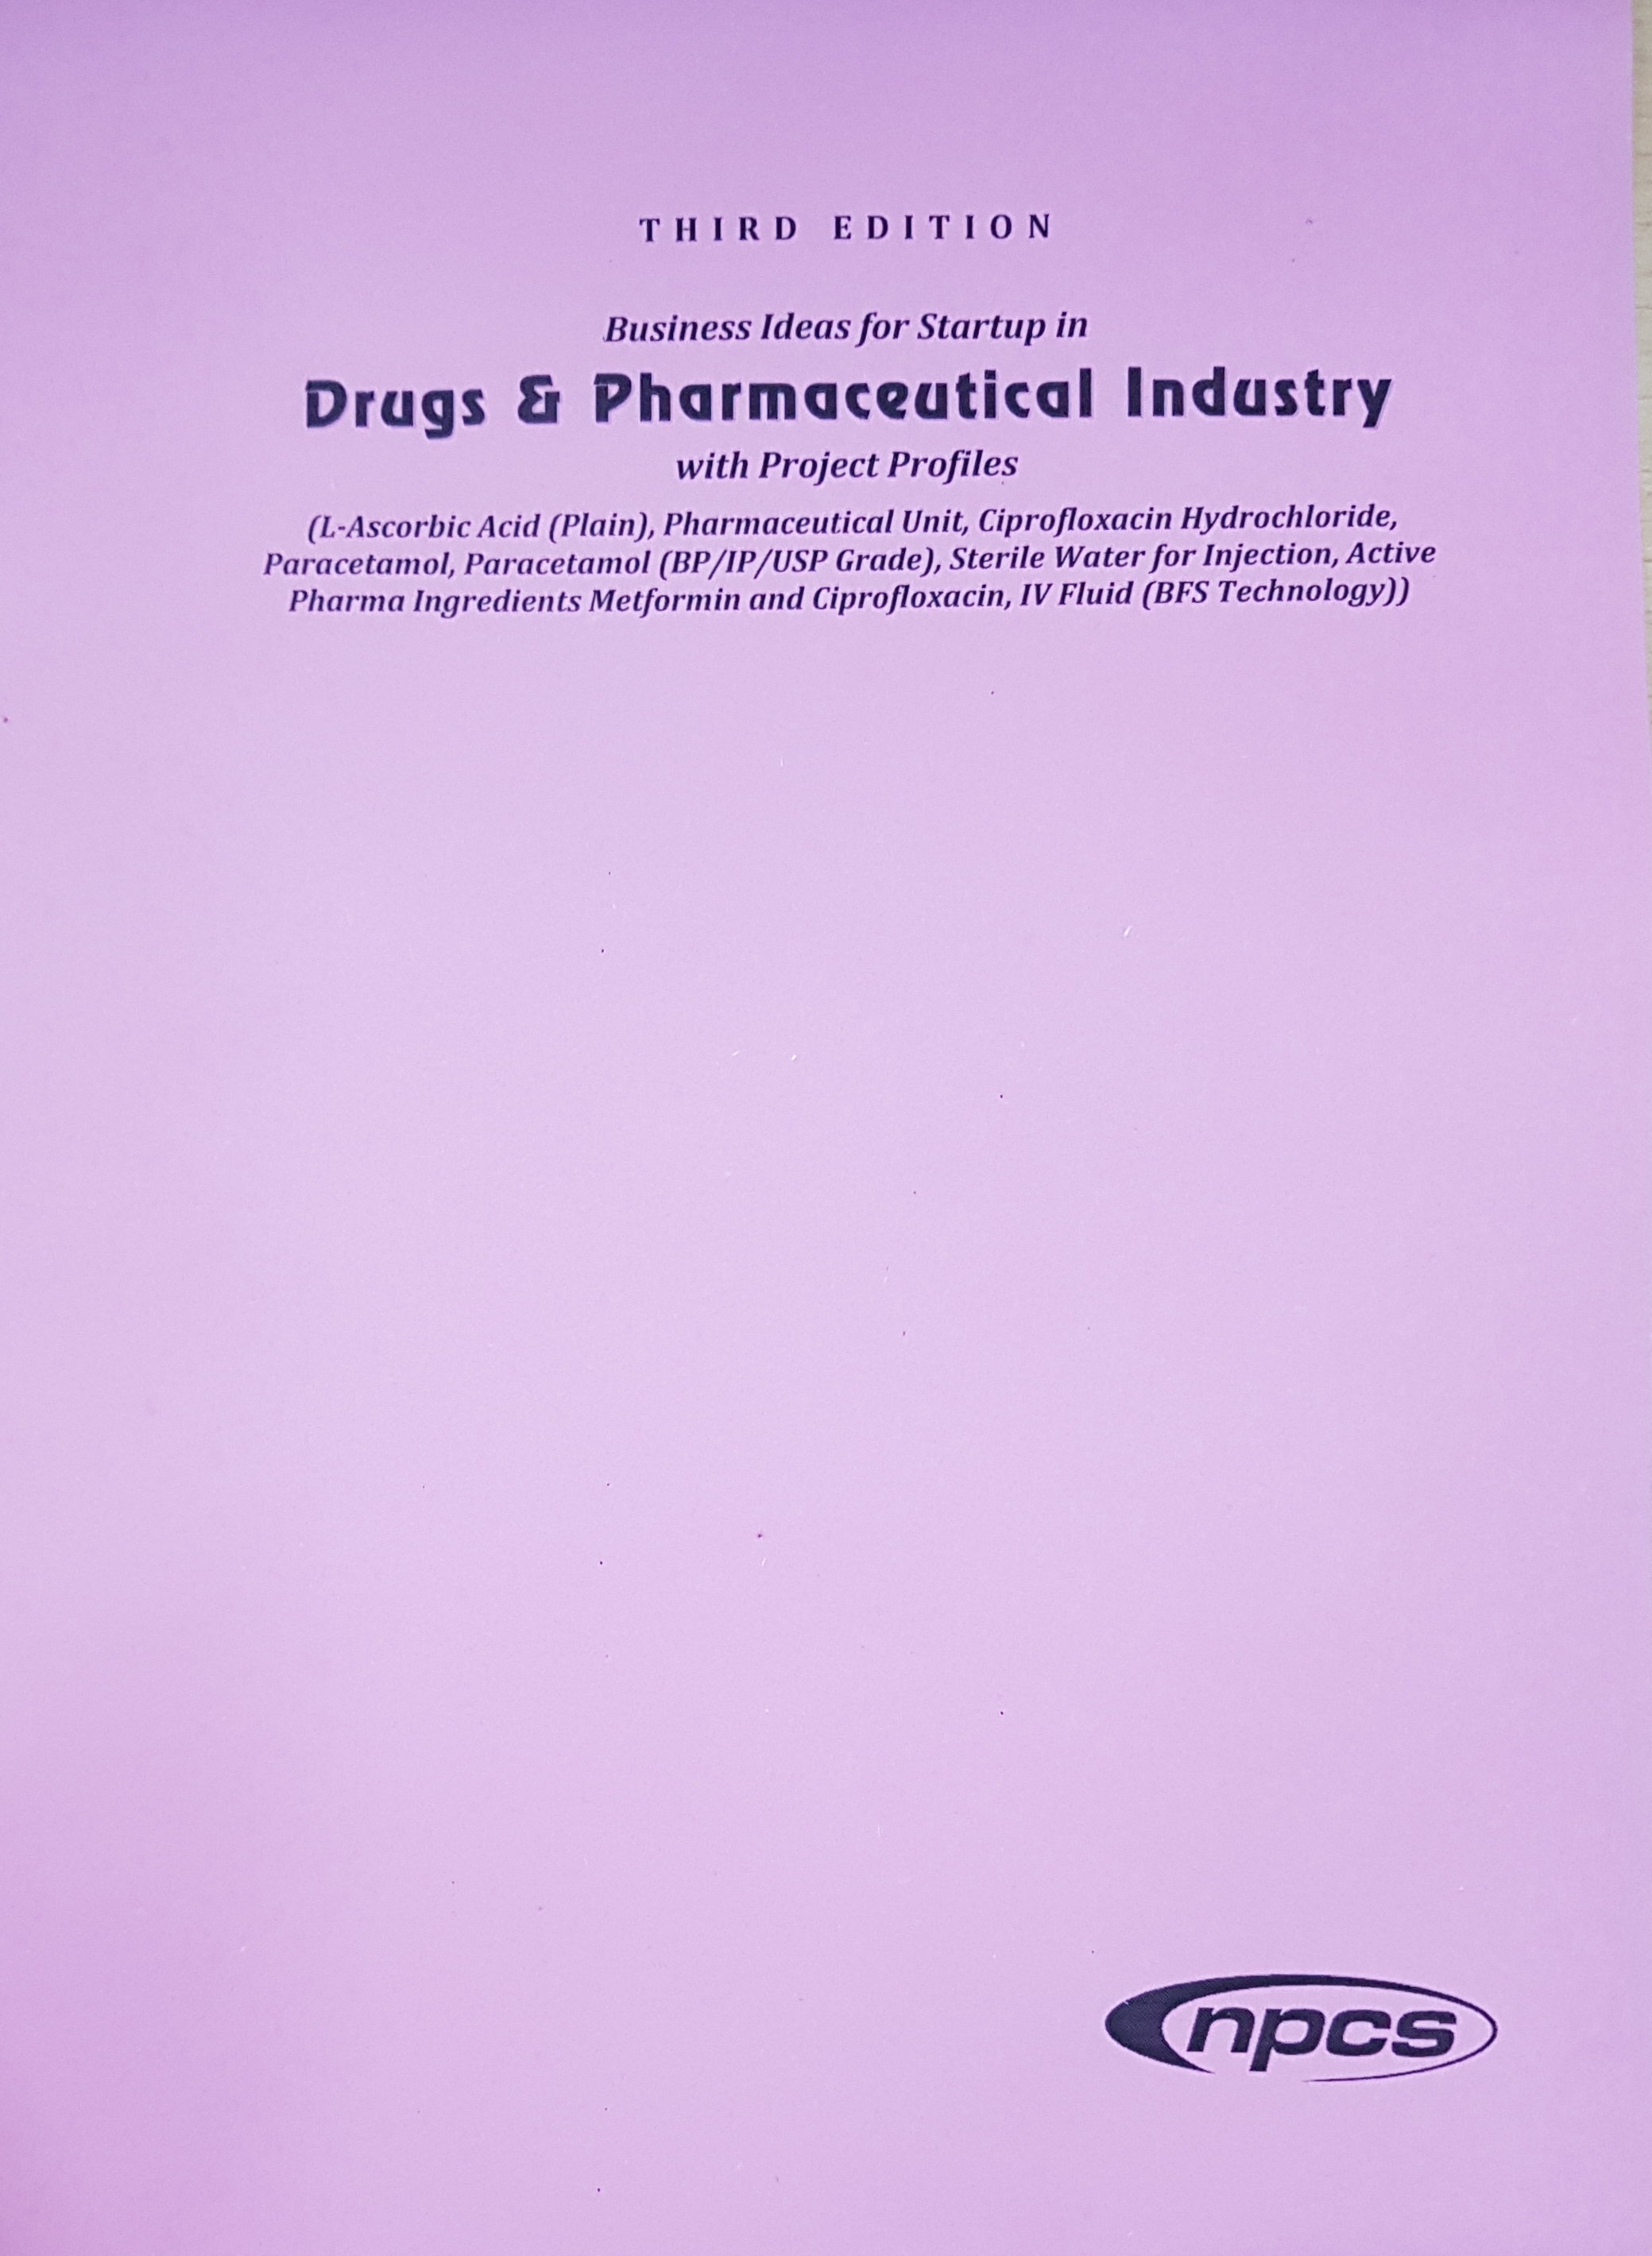 Business Ideas for Startup in  Drugs & Pharmaceutical Industry with Project Profiles  (L-Ascorbic Acid (Plain), Pharmaceutical Unit, Ciprofloxacin Hydrochloride, Paracetamol, Paracetamol (BP/IP/US6P Grade), Sterile Water for Injection, Active Pharma Ingredients Metformin and Ciprofloxacin, IV Fluid (BFS Technology)) (3rd Edition)